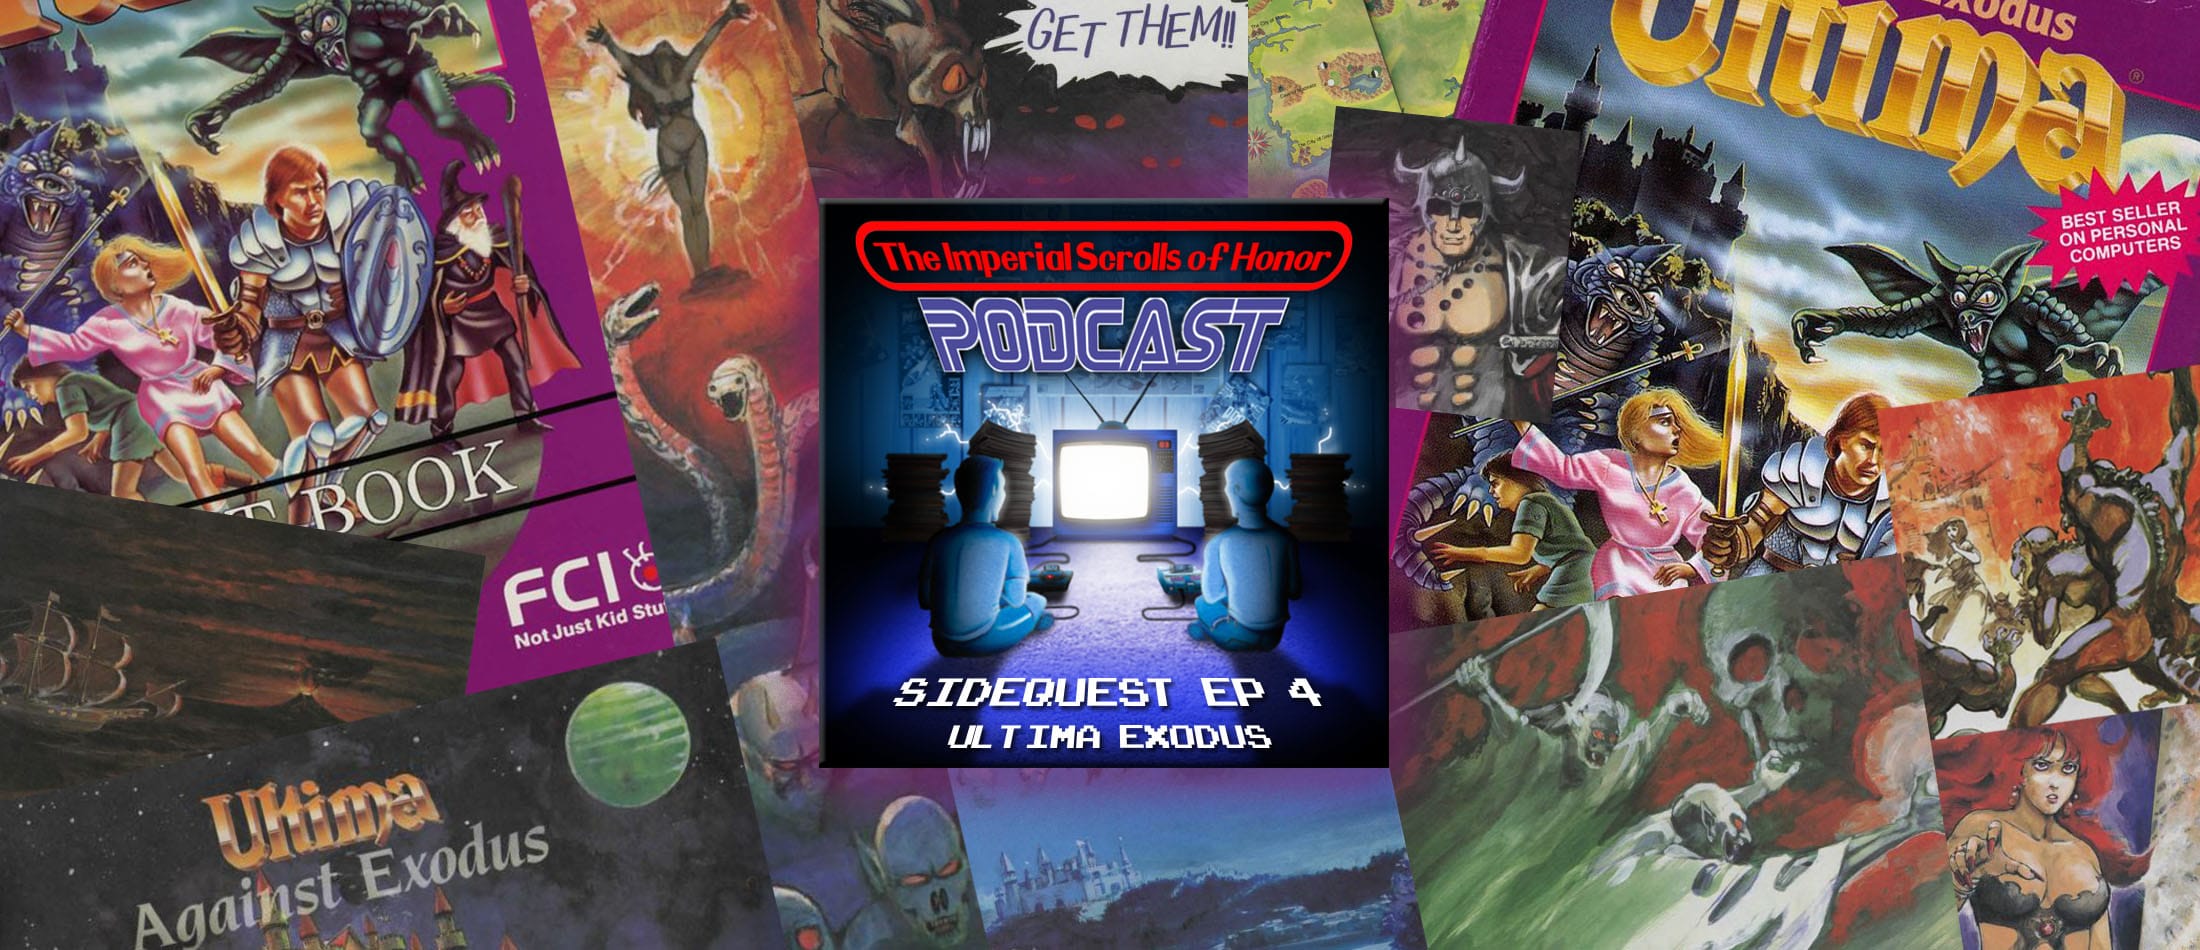 The Imperial Scrolls of Honor Podcast - SIDEQUEST Ep 4 - Ultimate: Exodus (NES)